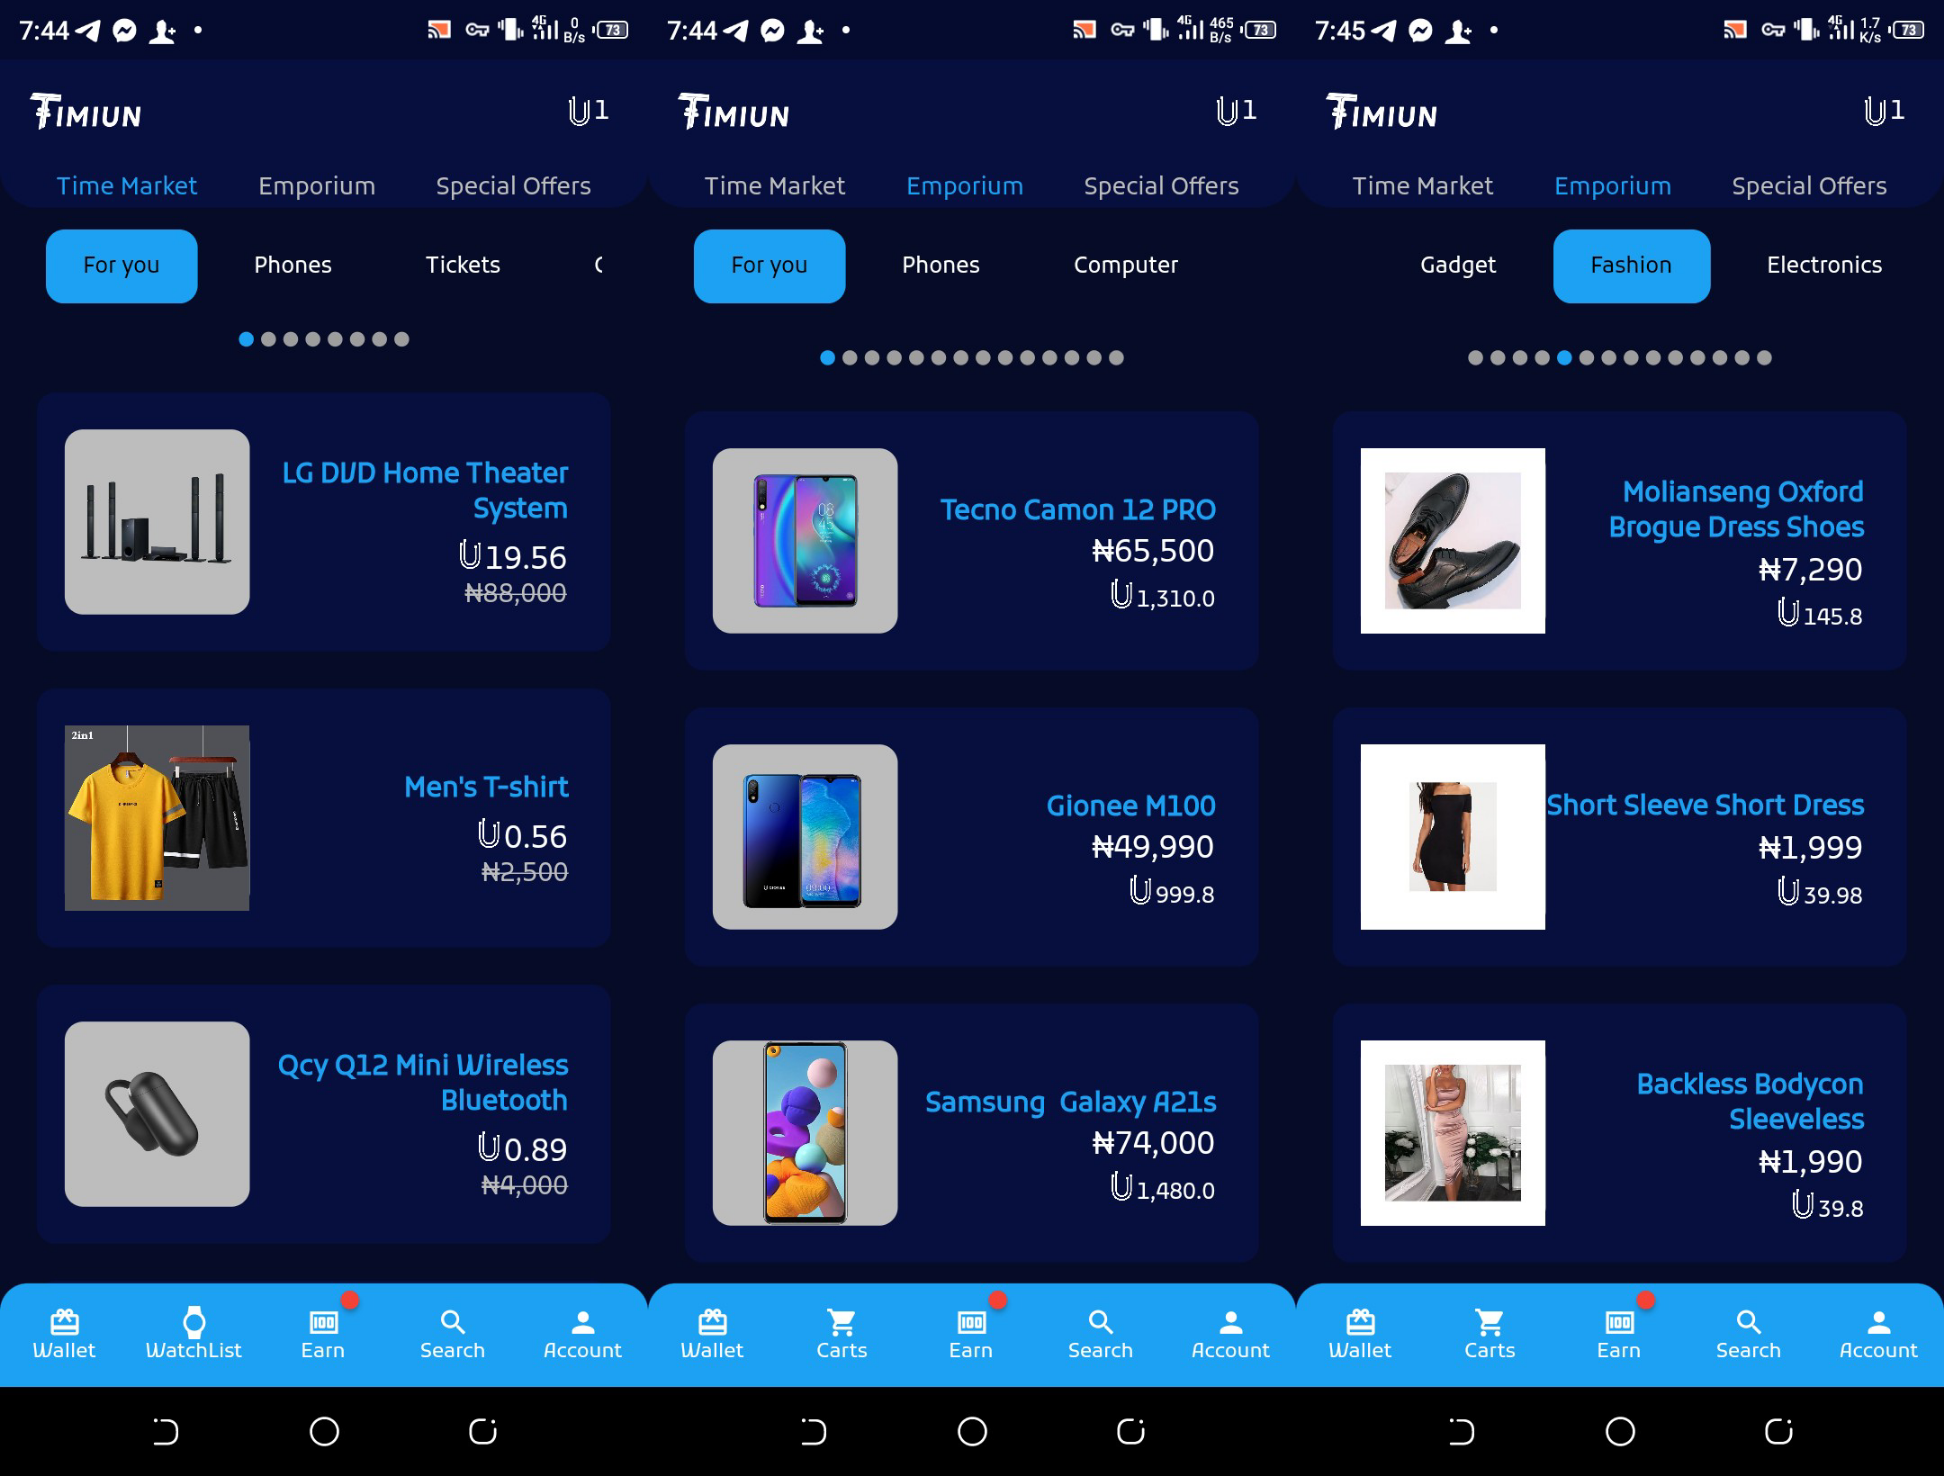 timiun-online-shop-first-ever-online-shop-with-drone-package-delivery-and-upxit-crypto-referral-and-payment-method-droidvilla-tech